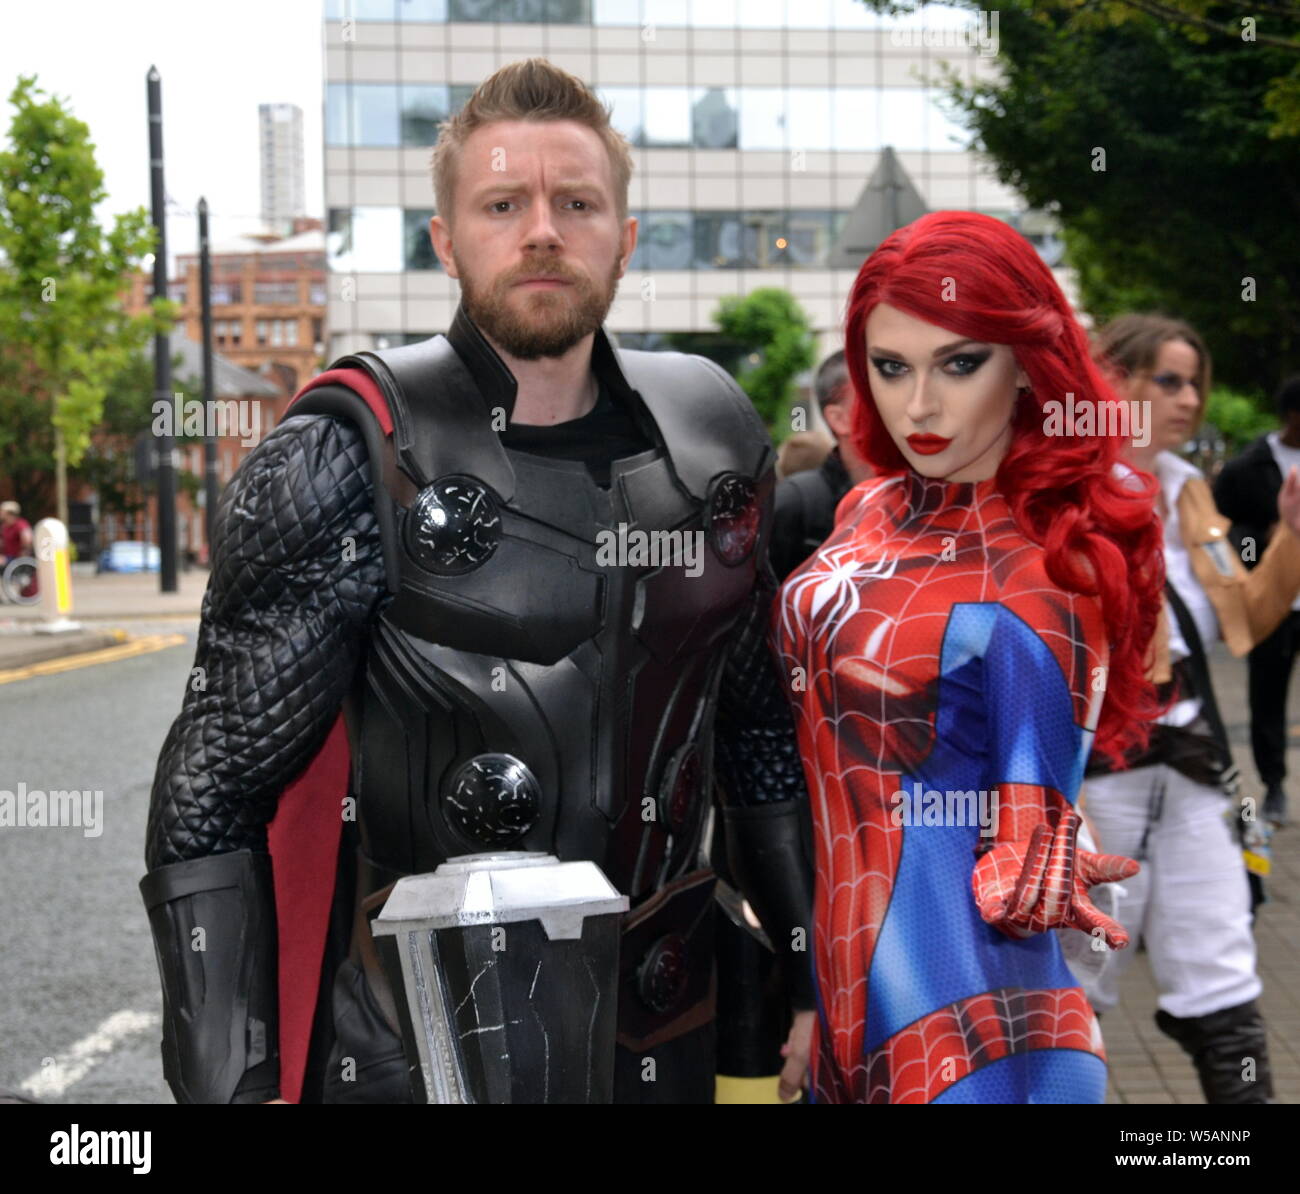 Attendees at the MCM Comic Con pop culture convention in Manchester, uk, July 27, 2019, at the start of a two day event where many participants dress up as their favourite superhero, anime, villain or pokemon character. The event attracts thousands of sci- fi enthusiasts, comic collectors, fantasy and game fans to the Manchester Central Convention Centre in city centre Manchester. Stock Photo